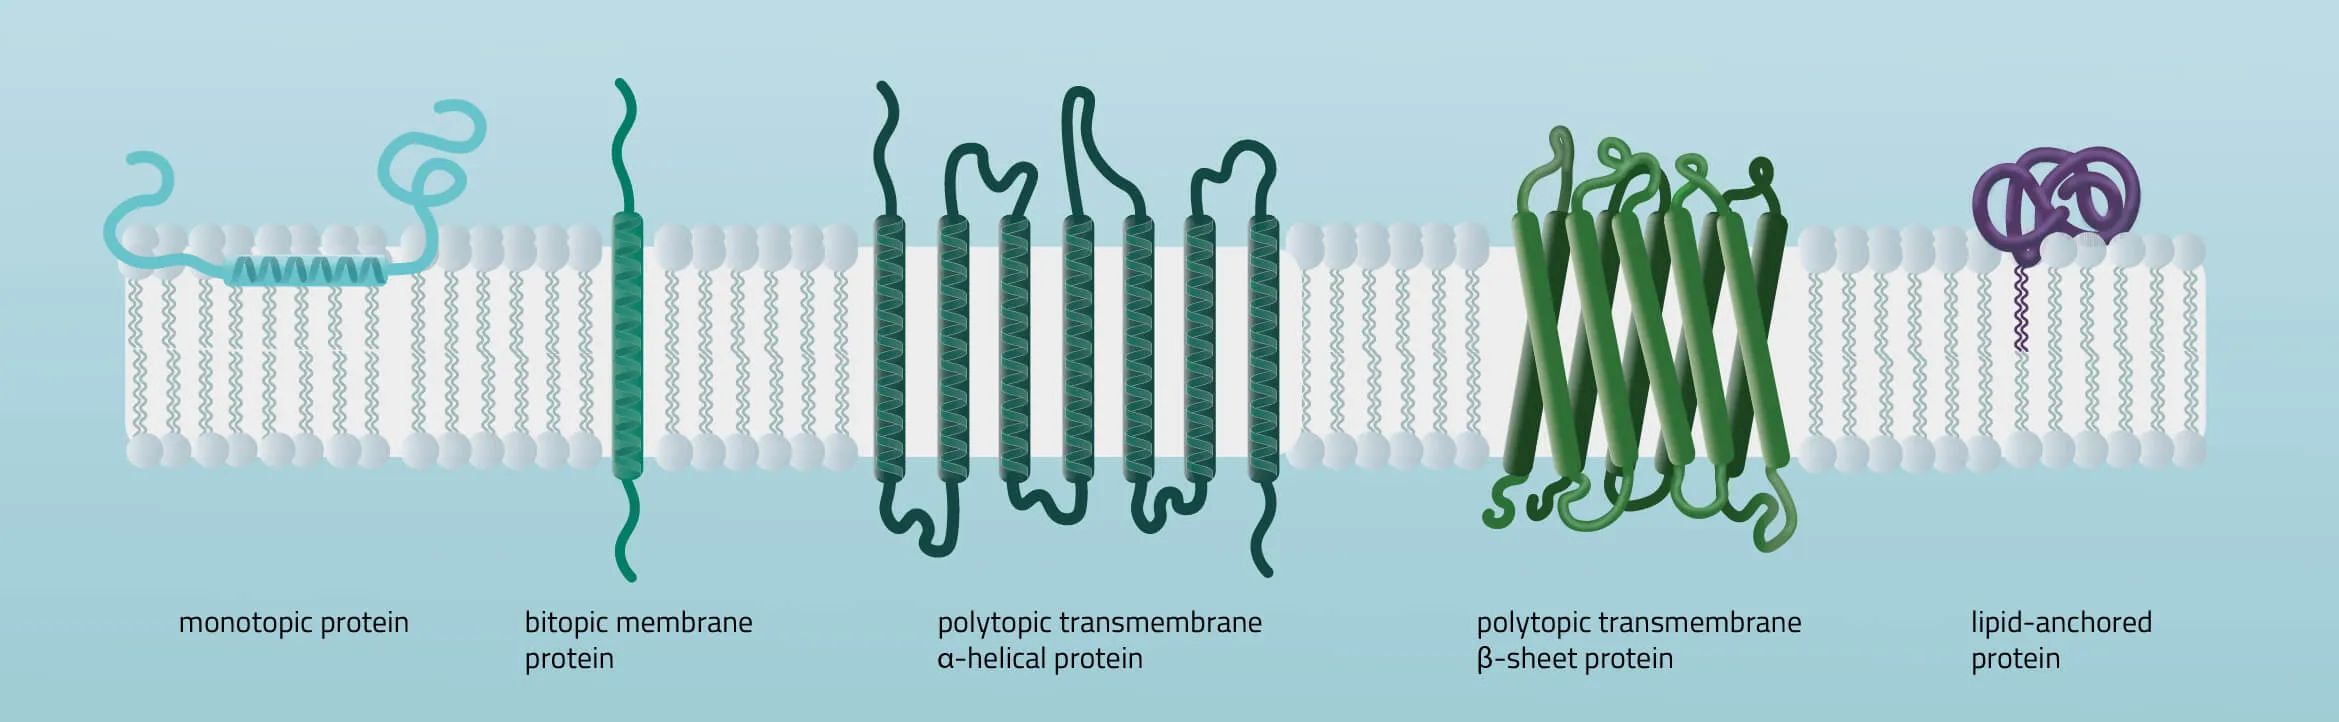 Compositions, structures and dispositions of membrane proteins